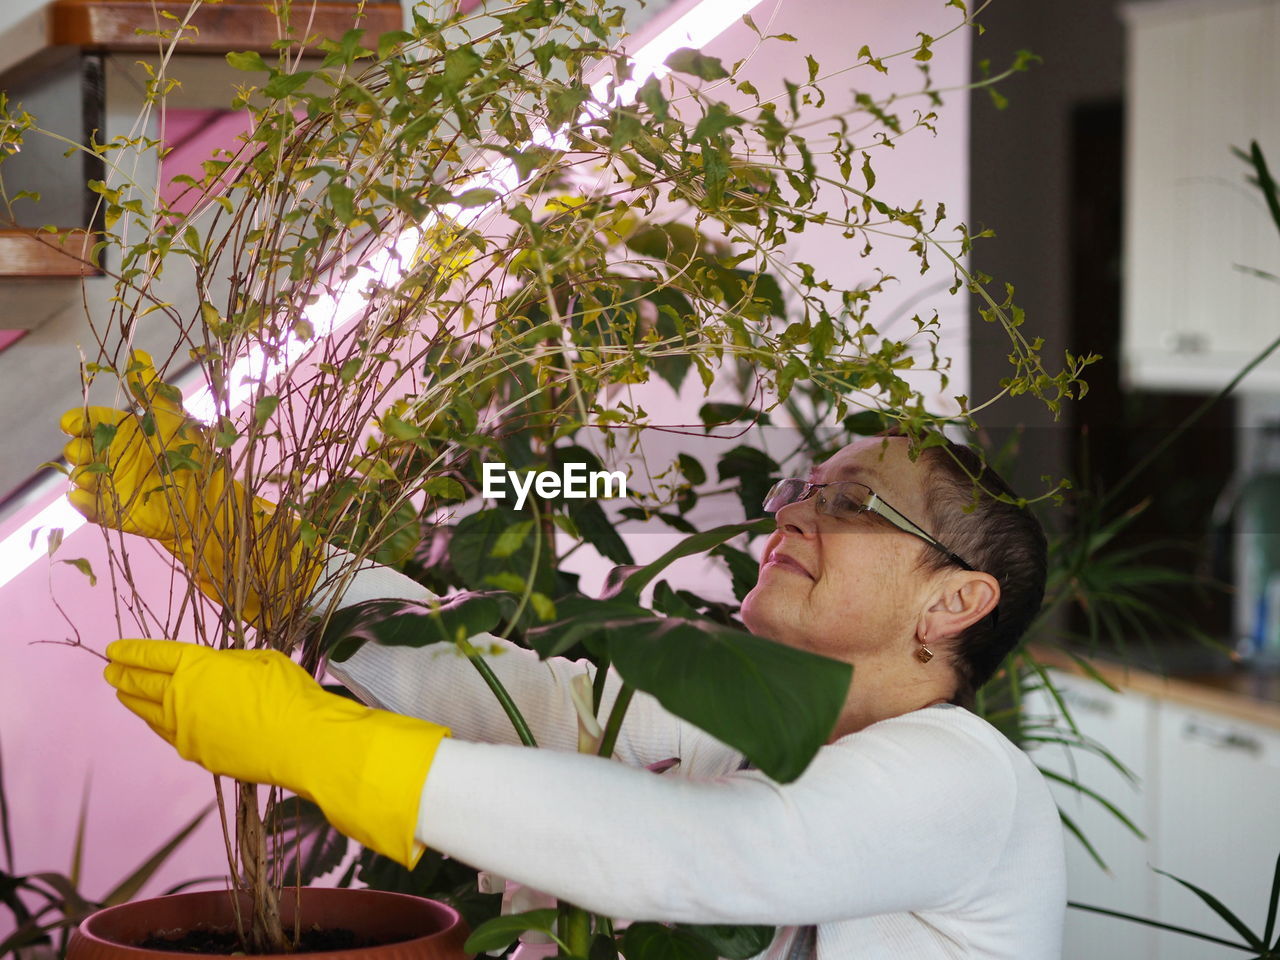 Houseplants grow under artificial lighting in a private house in winter. the woman looks 